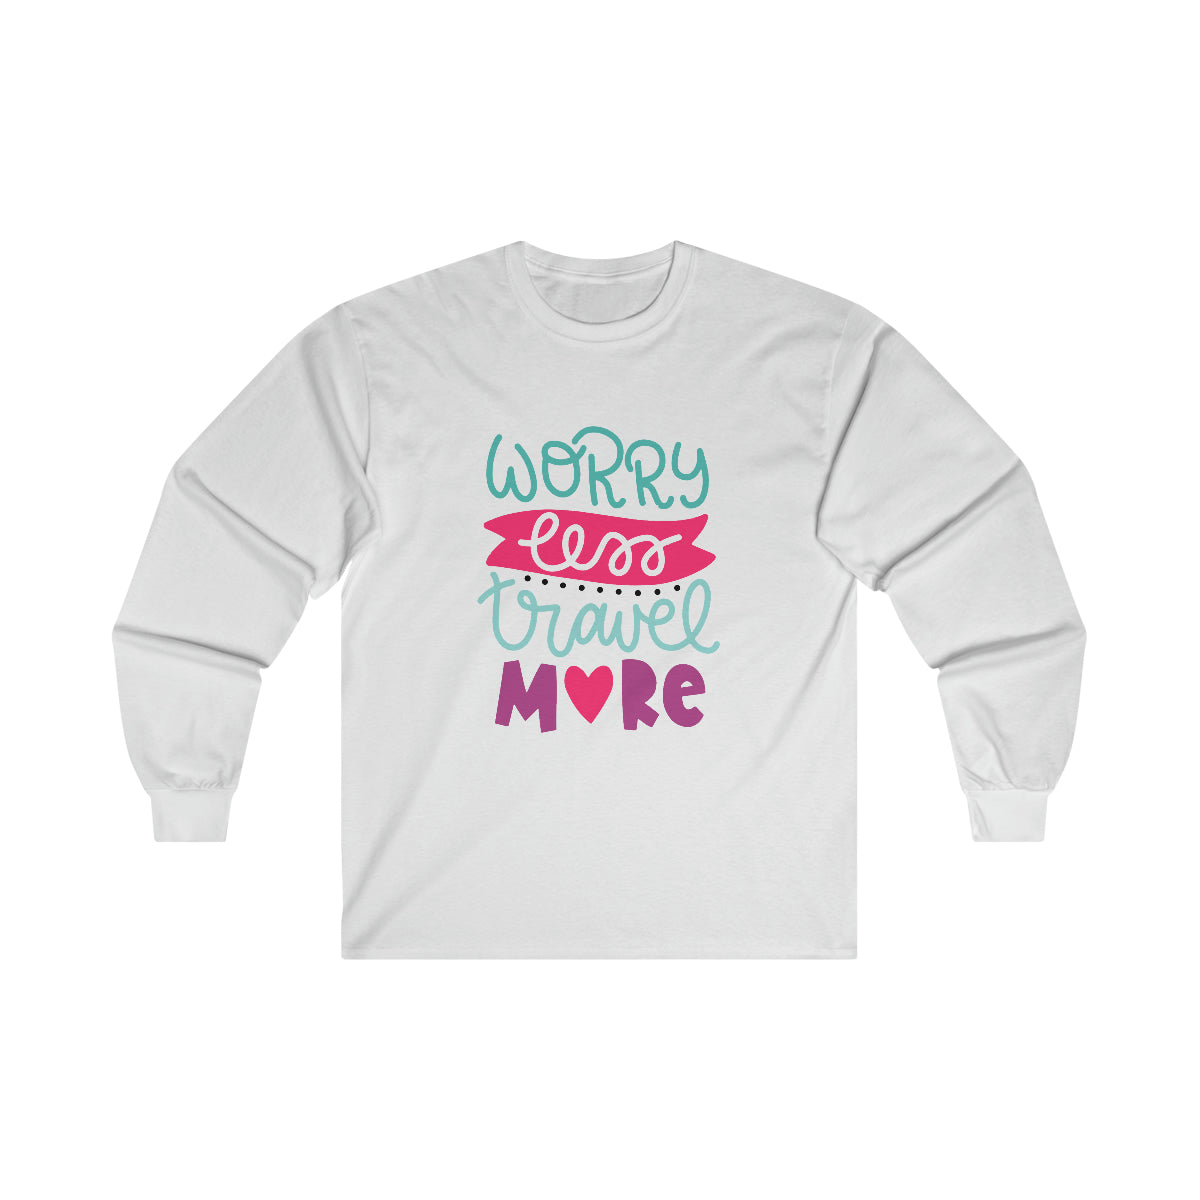 Worry Less Travel More Ultra Cotton Long Sleeve Tee